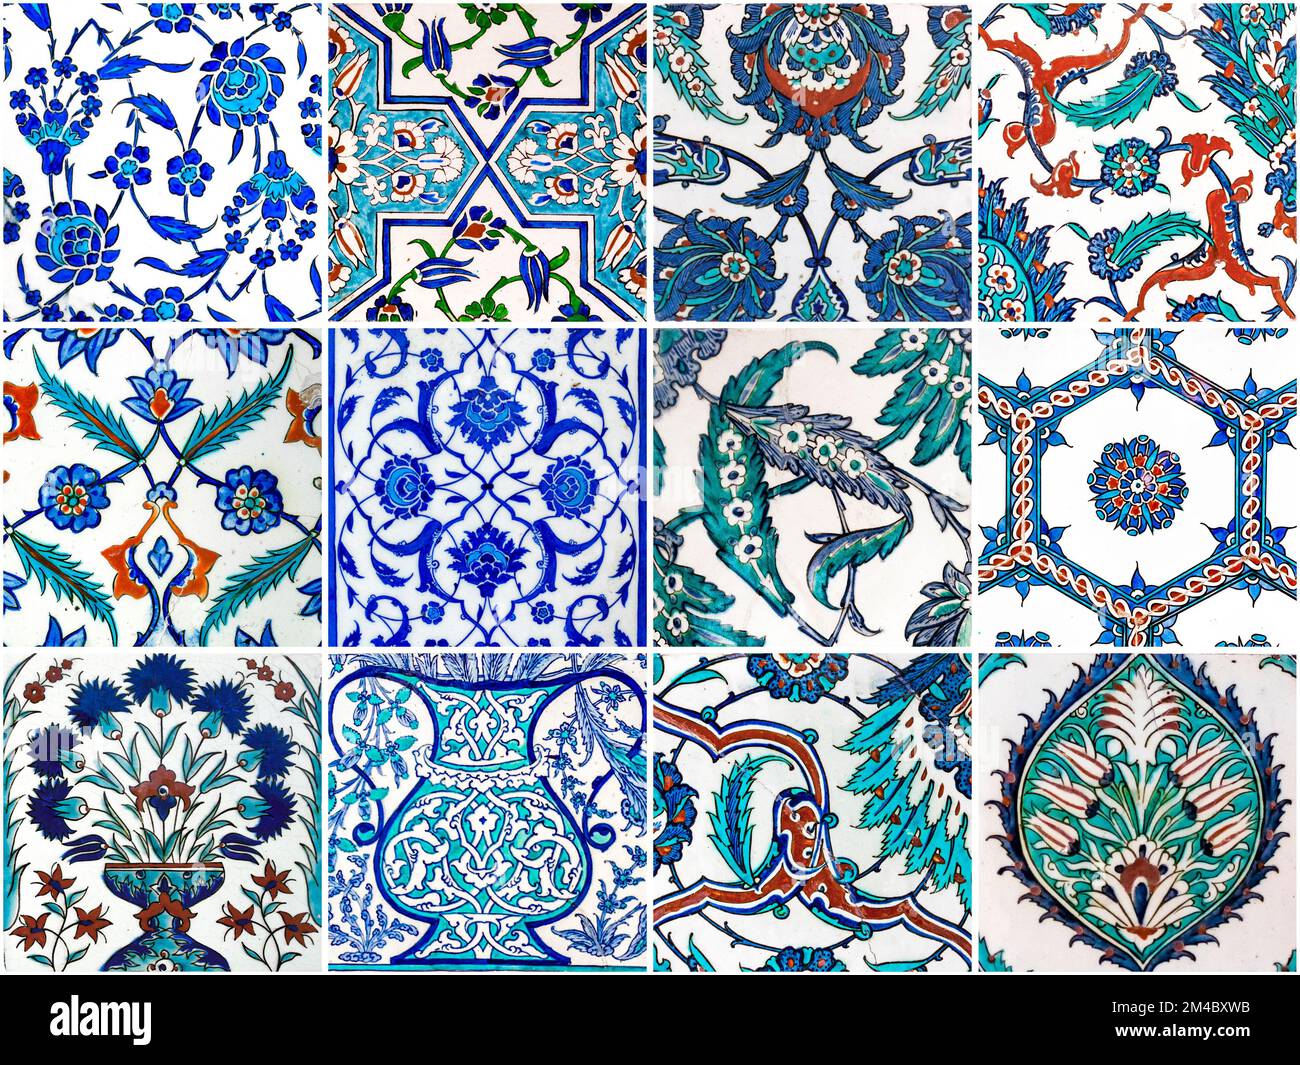 Set of ancient traditional handmade tiles with flowers pattern. Stock Photo